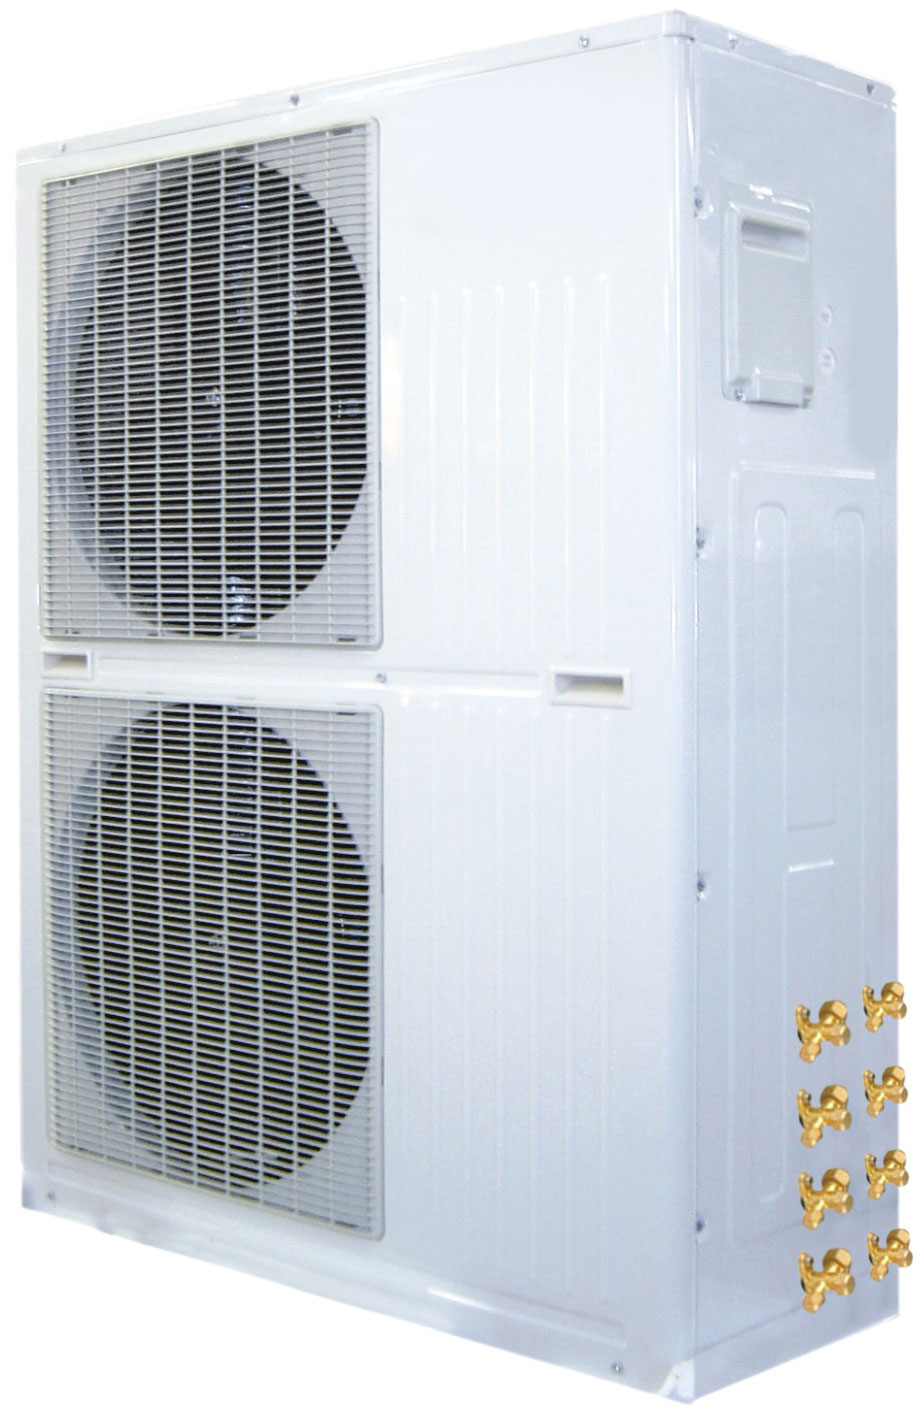 AIR CONDITIONING. PORTABLE AIR CONDITIONING, DEHUMIDIFIERS, FIXED